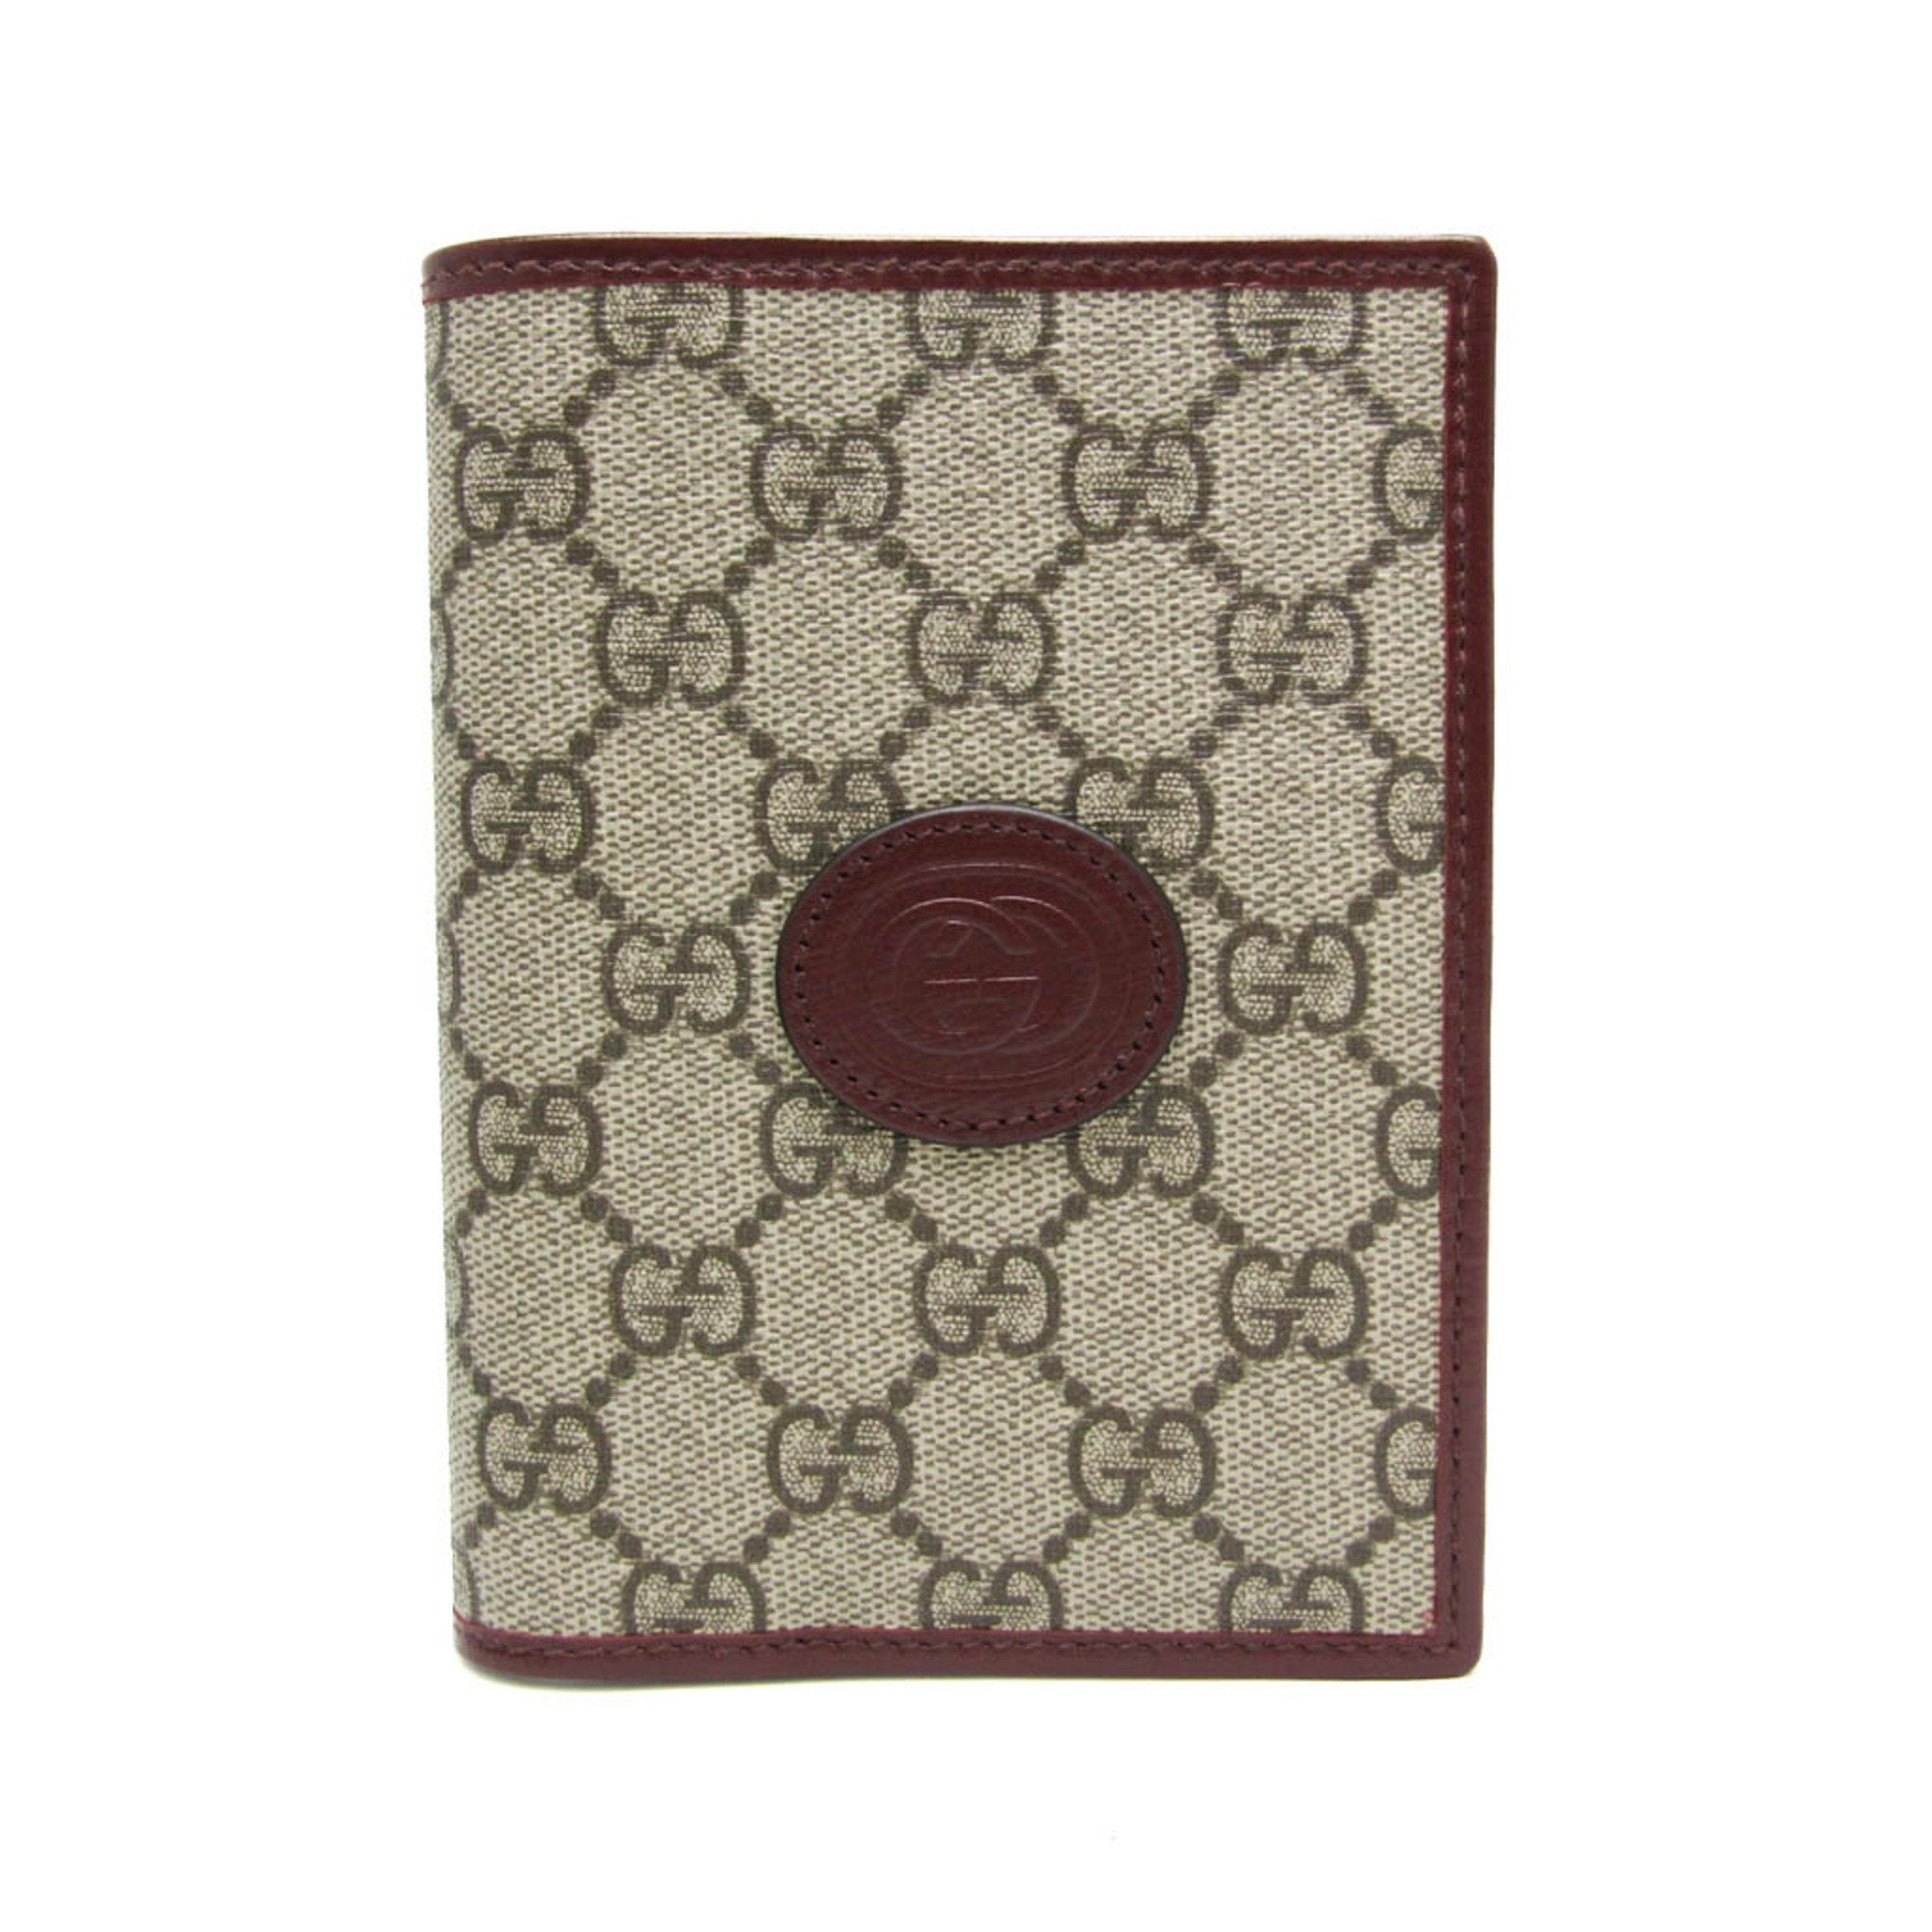 With Interlocking G GG 724562 PVC Leather Passport Cover